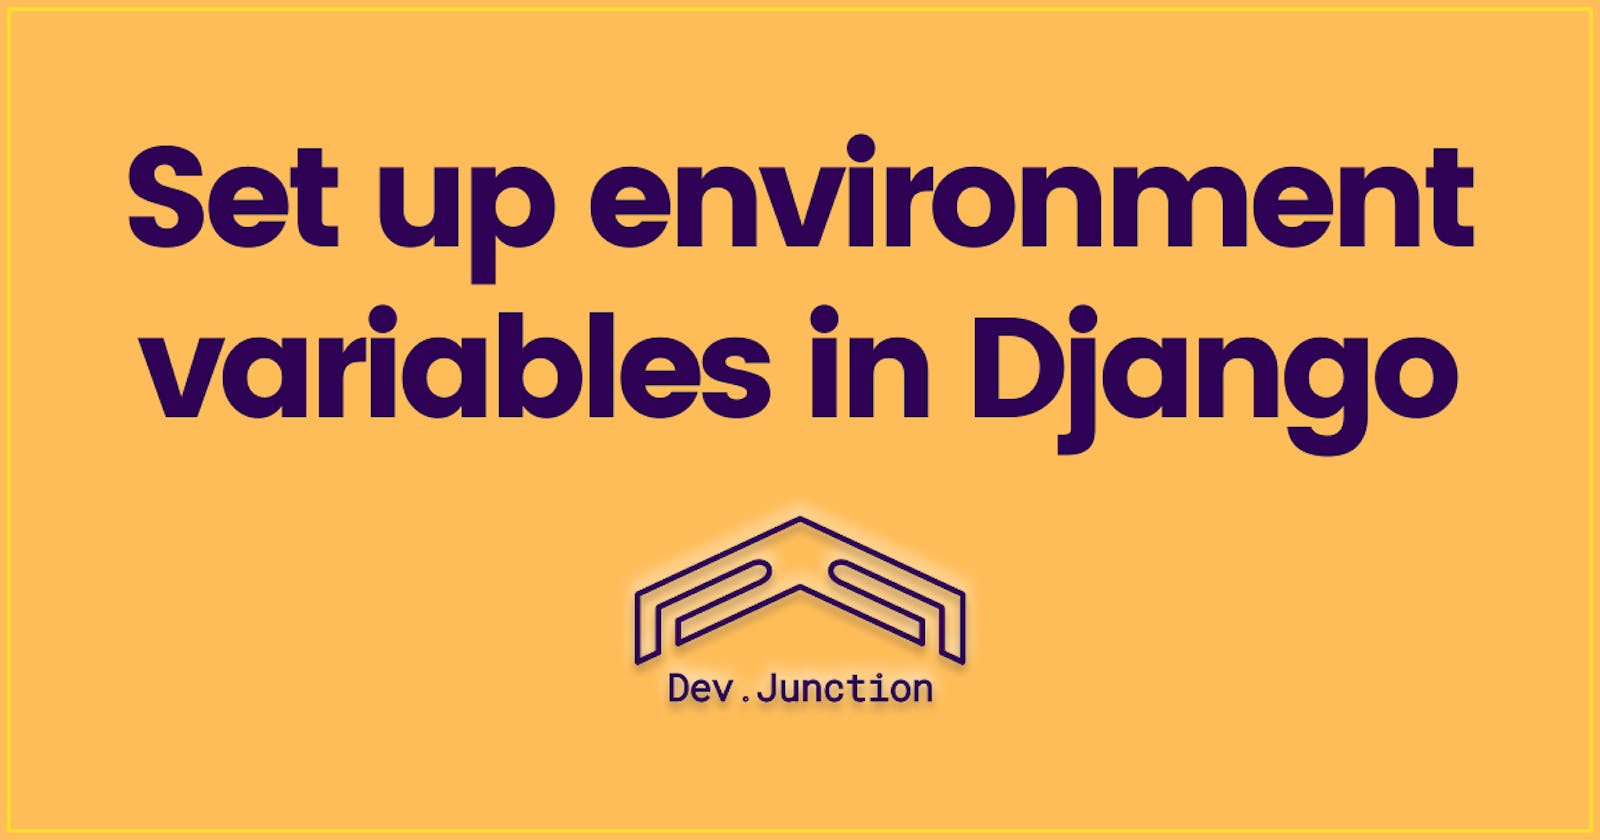 How to set up environment variables in Django?